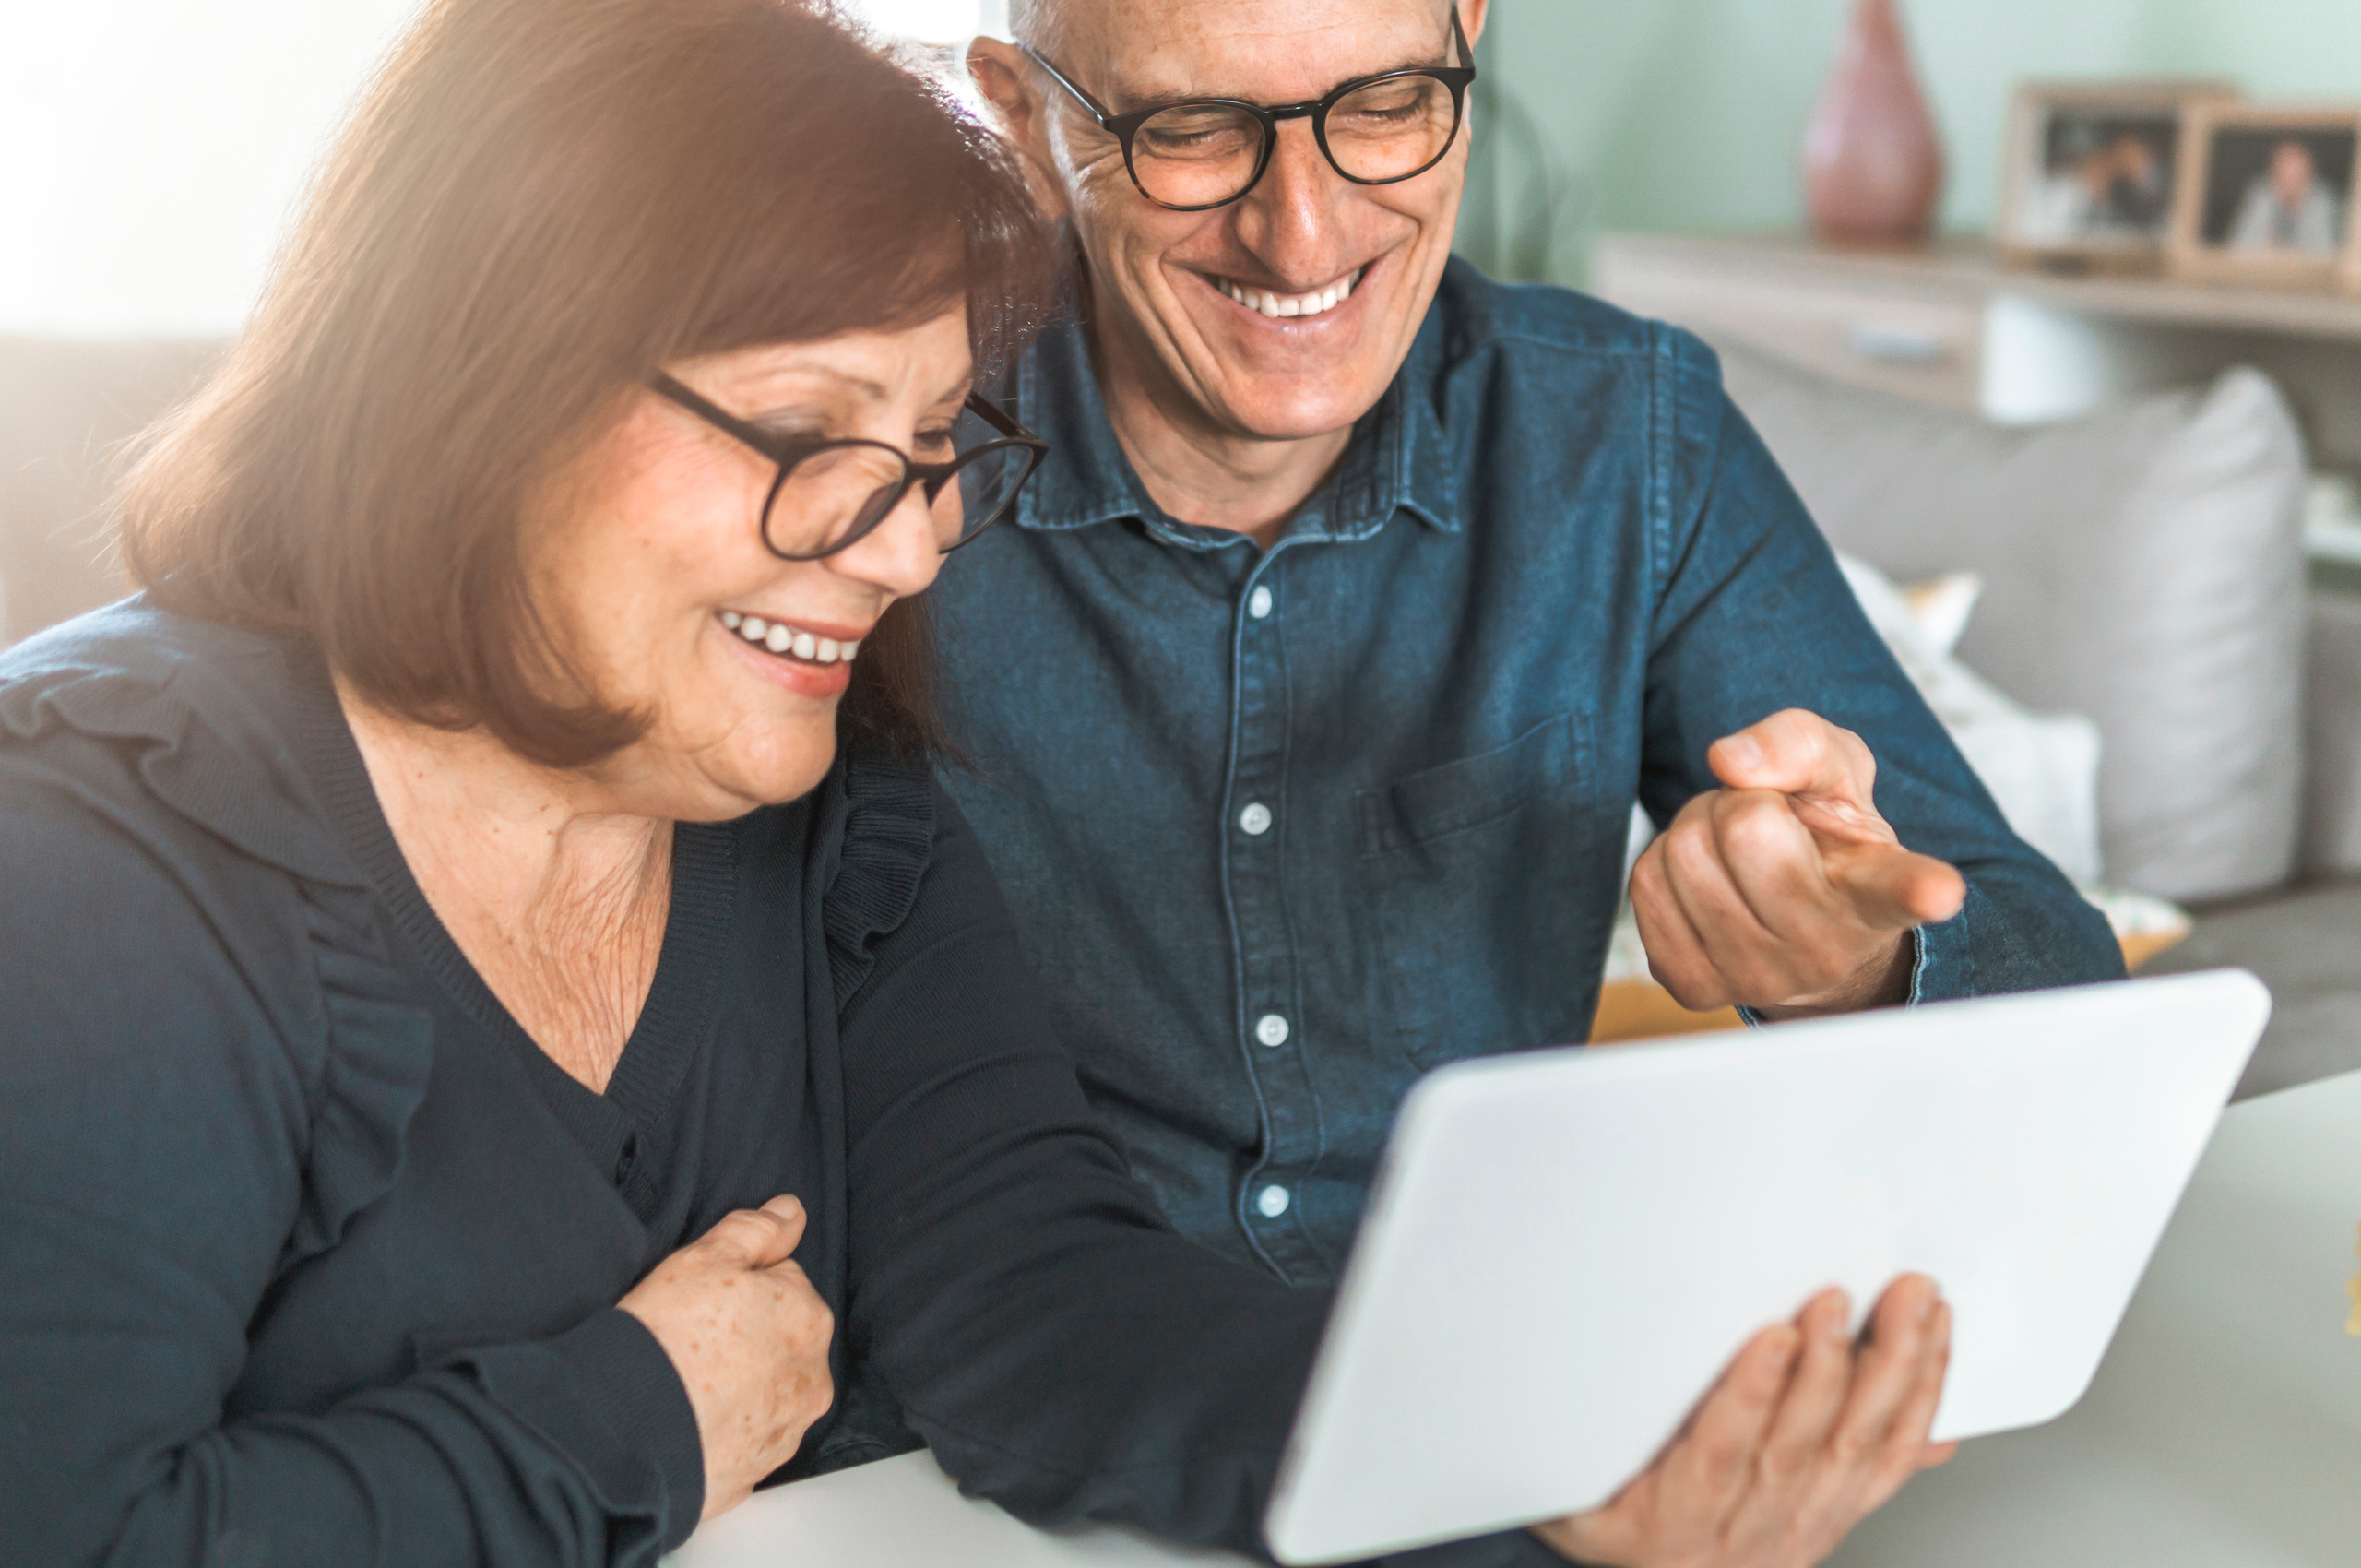 middle-aged couple looking at a tablet and smiling